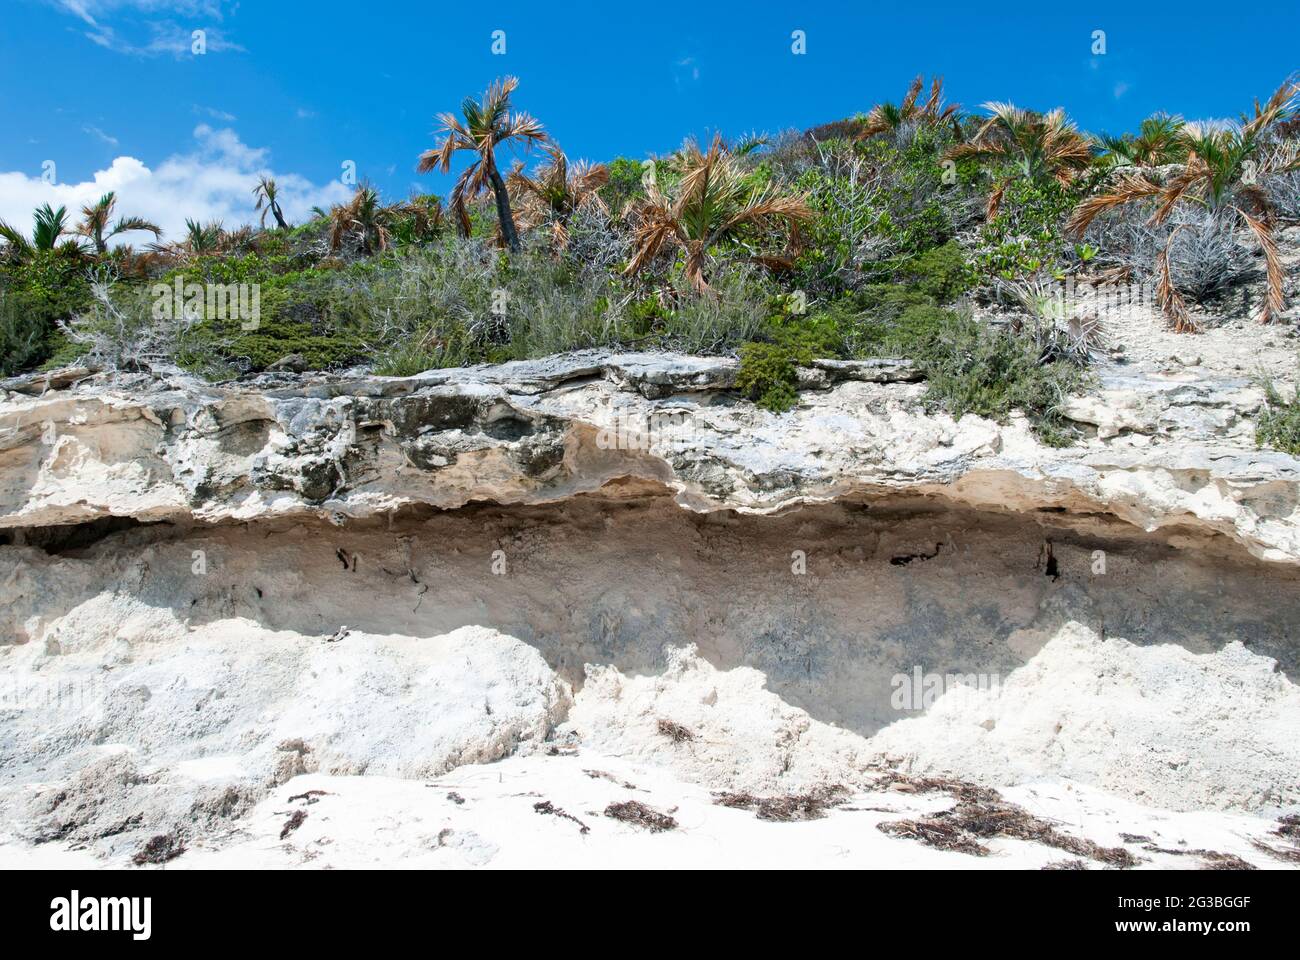 The eroded rocky landscape with brown color palm trees damaged by salty hurricane winds on Half Moon Cay uninhabited island (Bahamas). Stock Photo